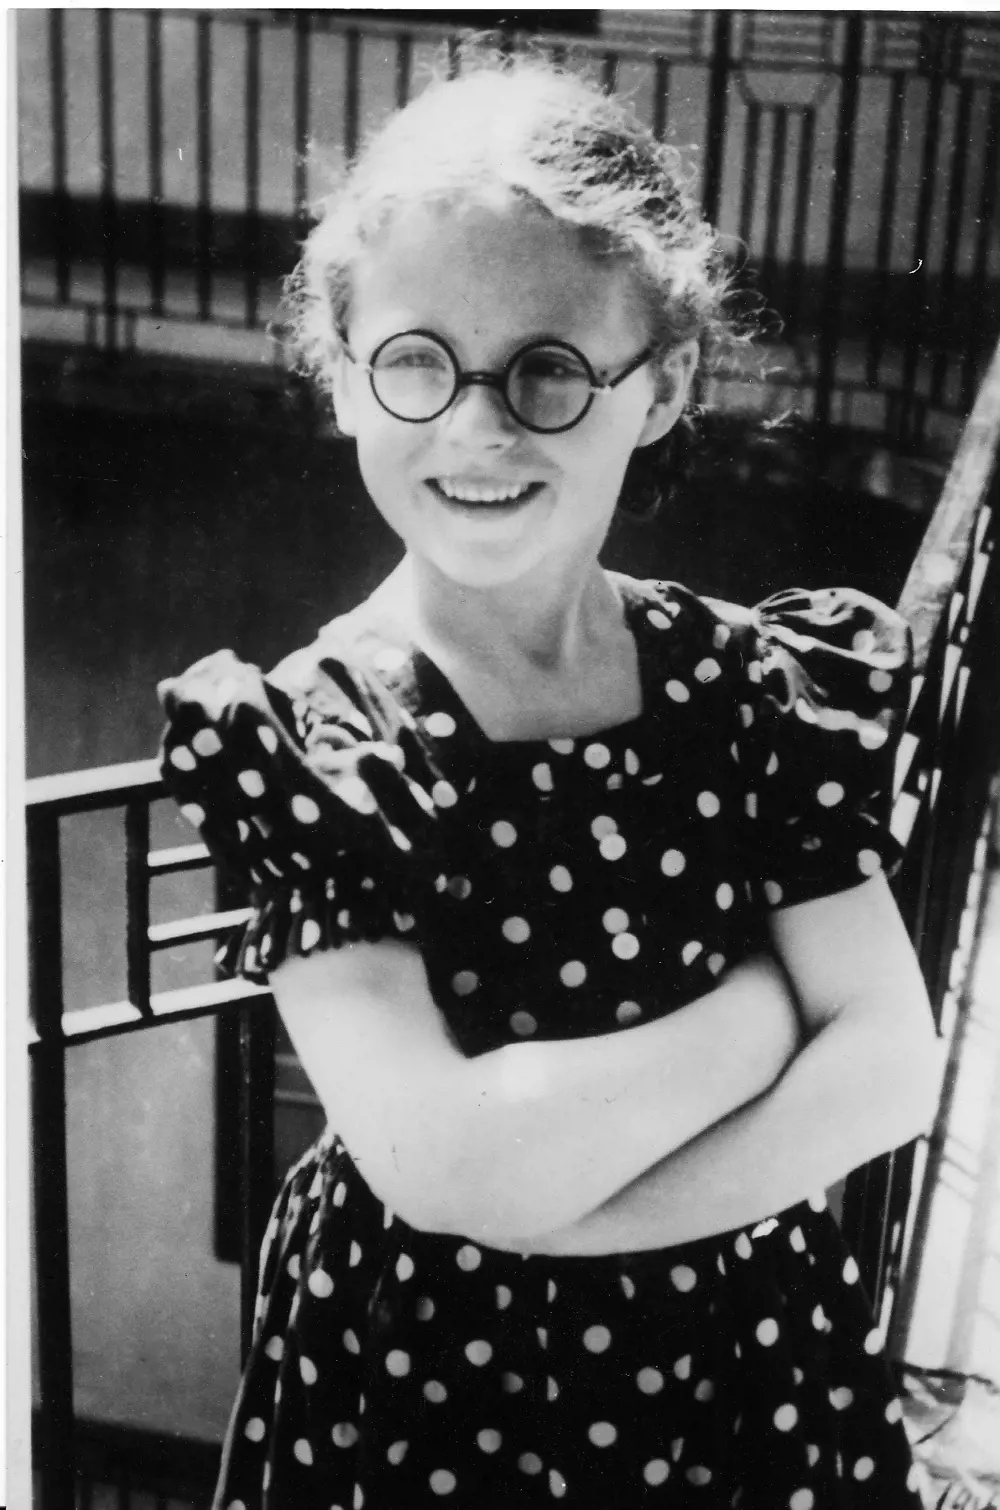 A black and white photograph of a six-year-old girl wearing glasses and a polka dot dress.